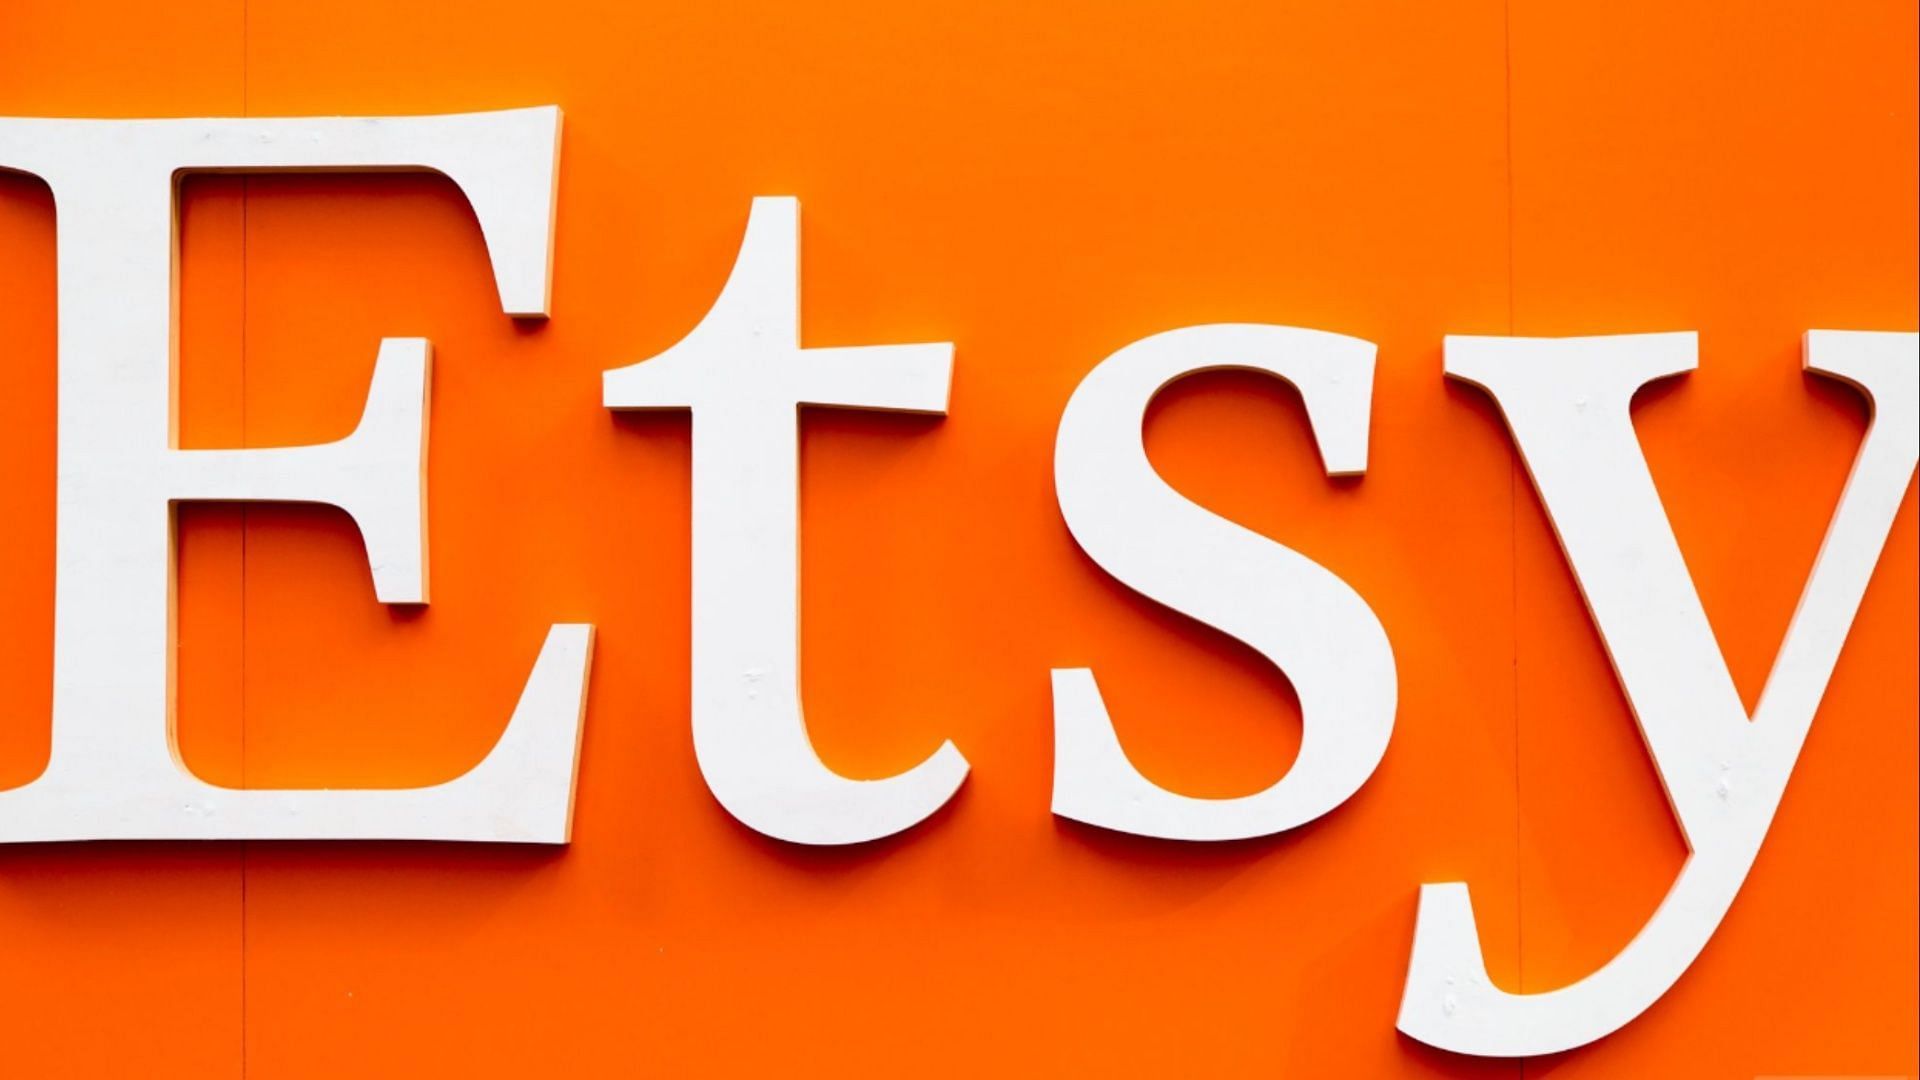 Etsy is an e-commerce site founded in 2005. (Image via YouTube/Etsy)